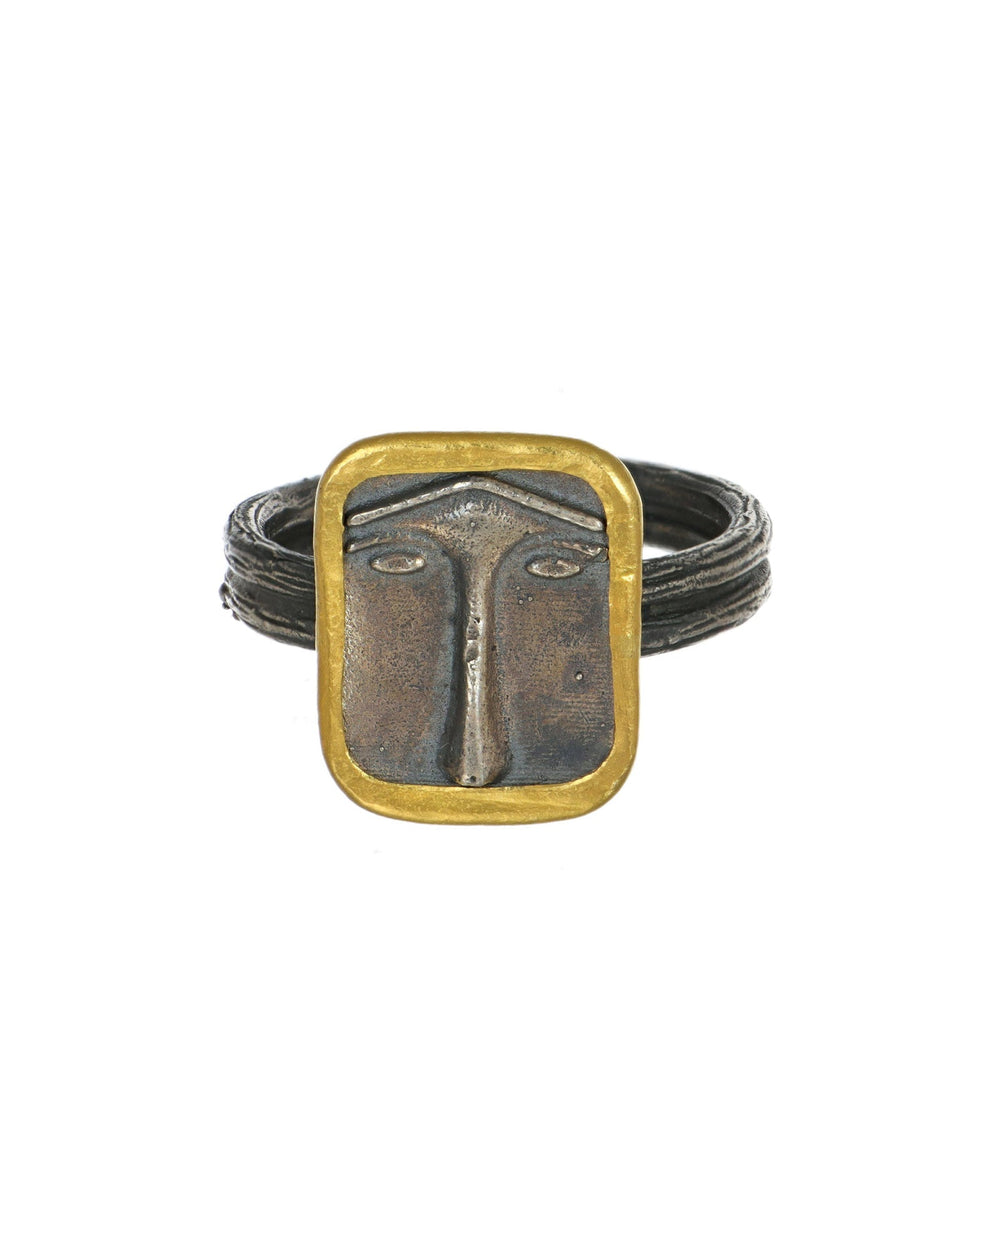 Lion's face ring